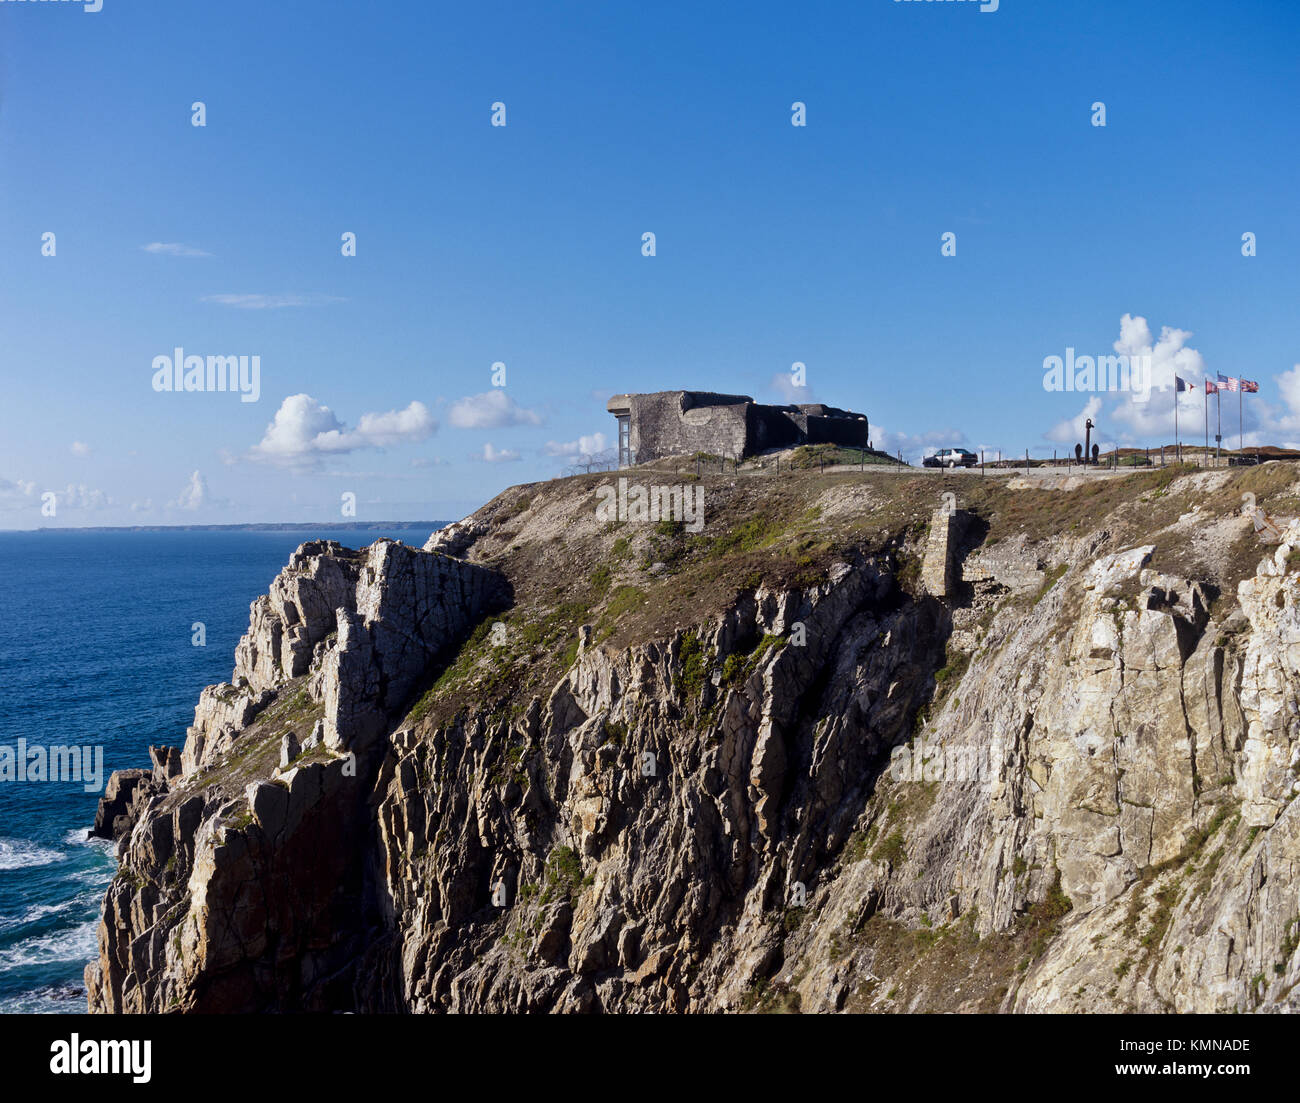 9725. Finistere, Crozon Peninsular, WW2 Battle of the Atlantic Bunker, Brittany, France Stock Photo